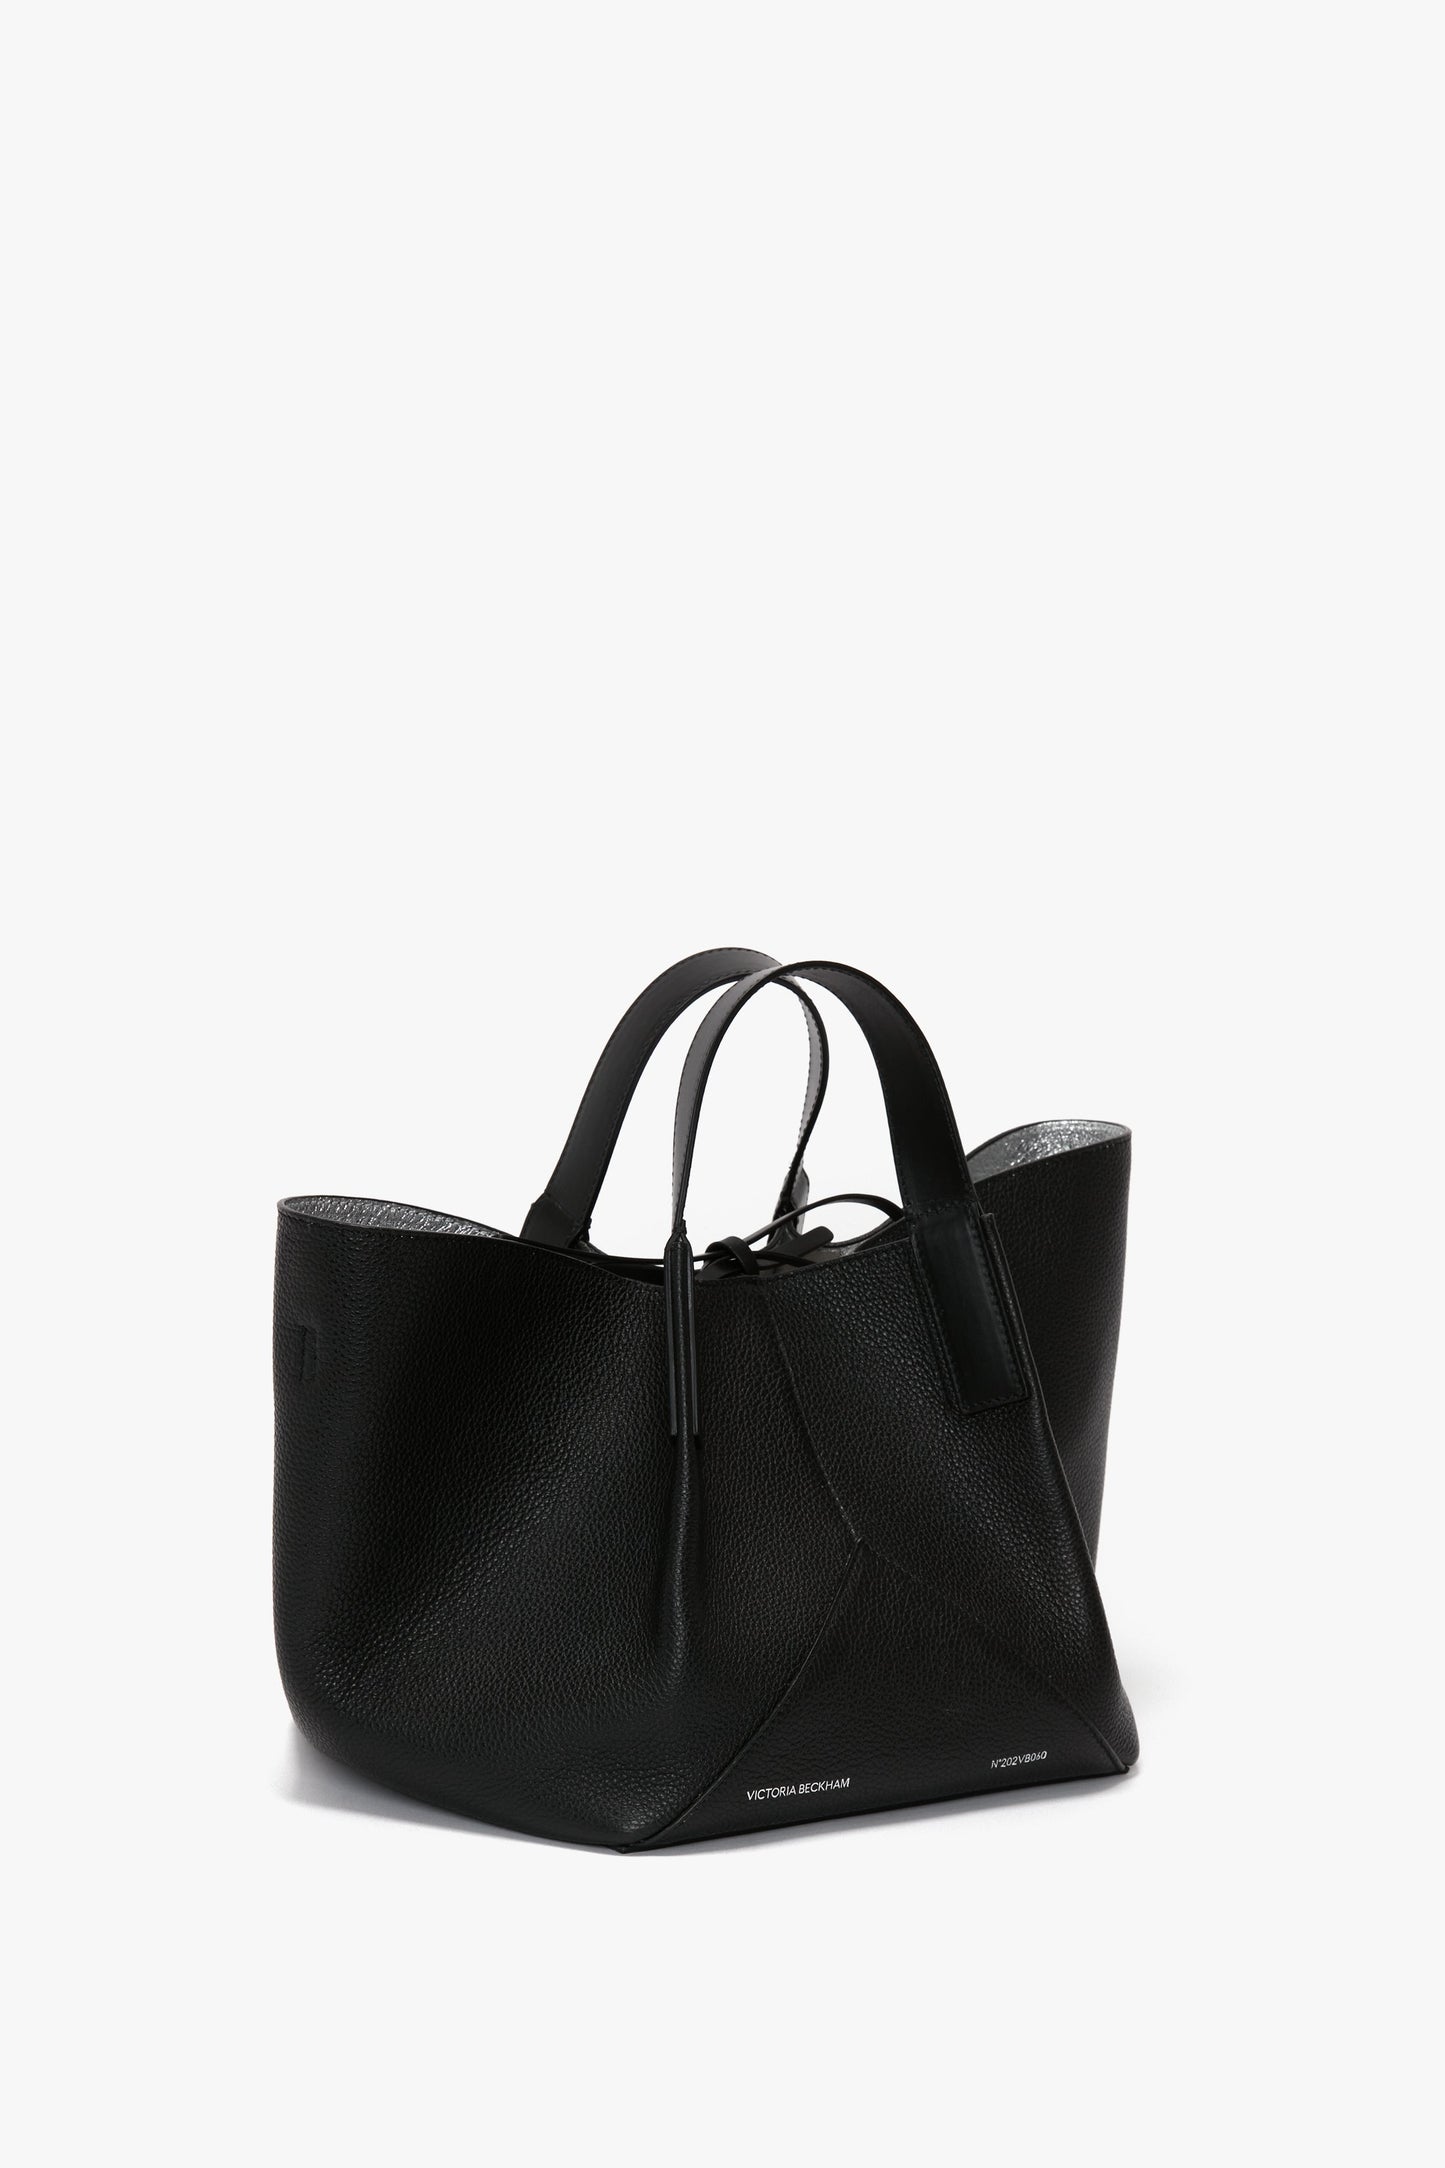 The W11 Mini Tote Bag In Black Leather by Victoria Beckham has two top handles, crafted from grainy calf leather for a touch of luxurious sophistication and minimalist design.